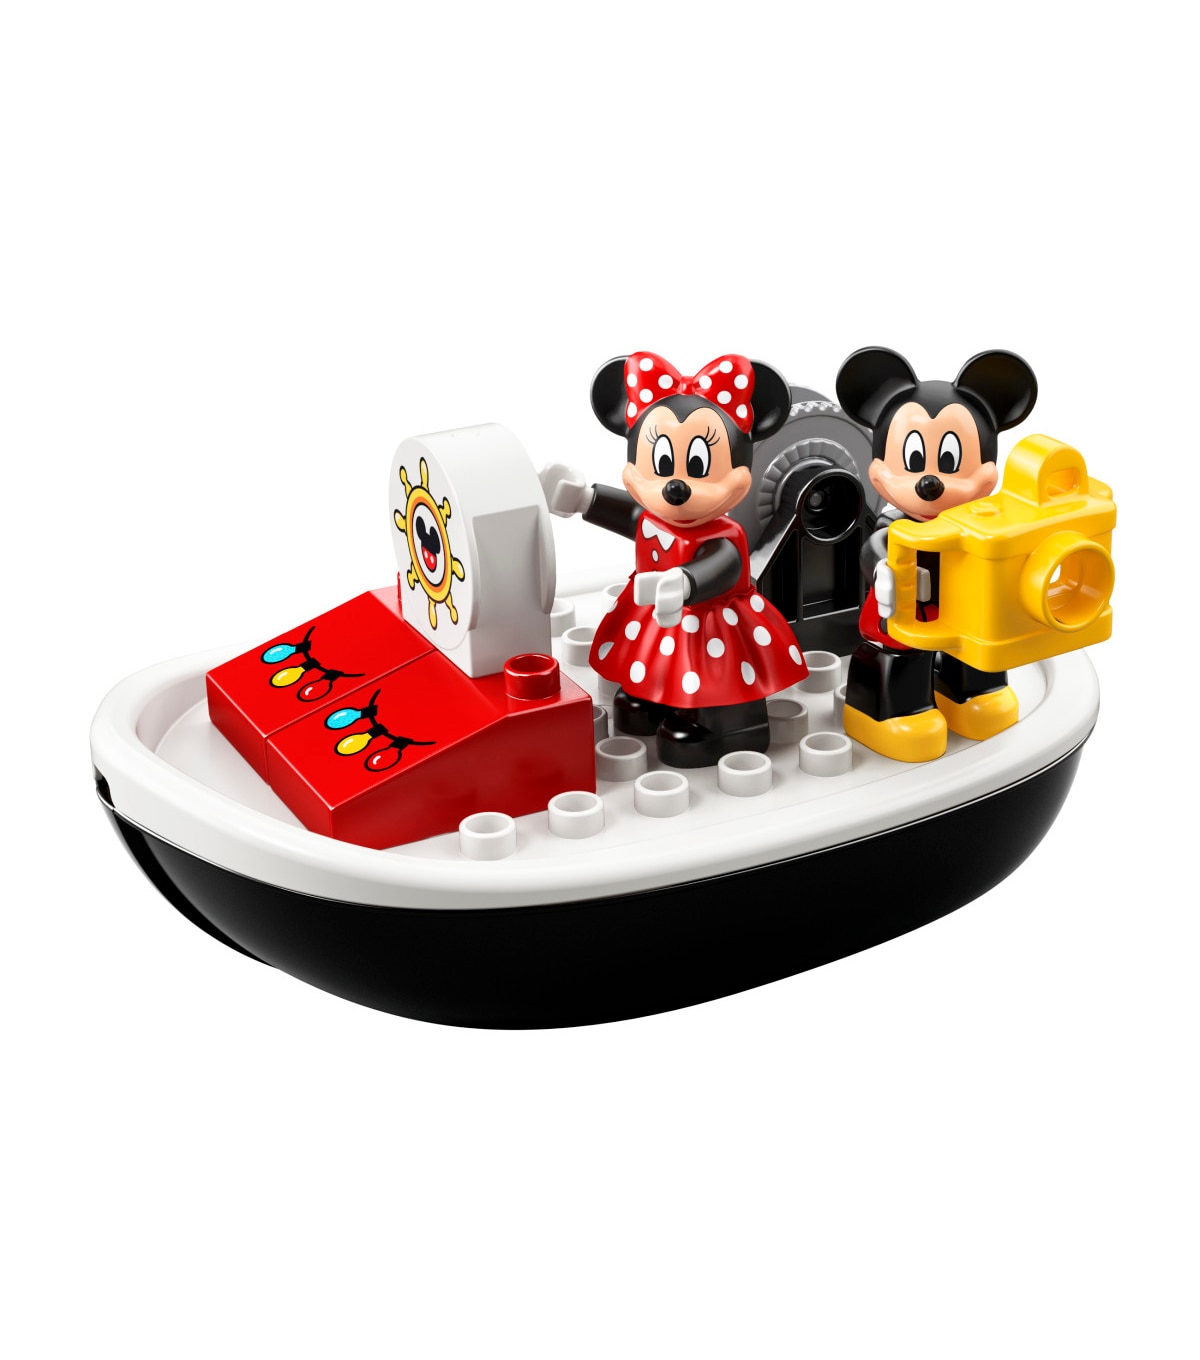 duplo mickey mouse boat